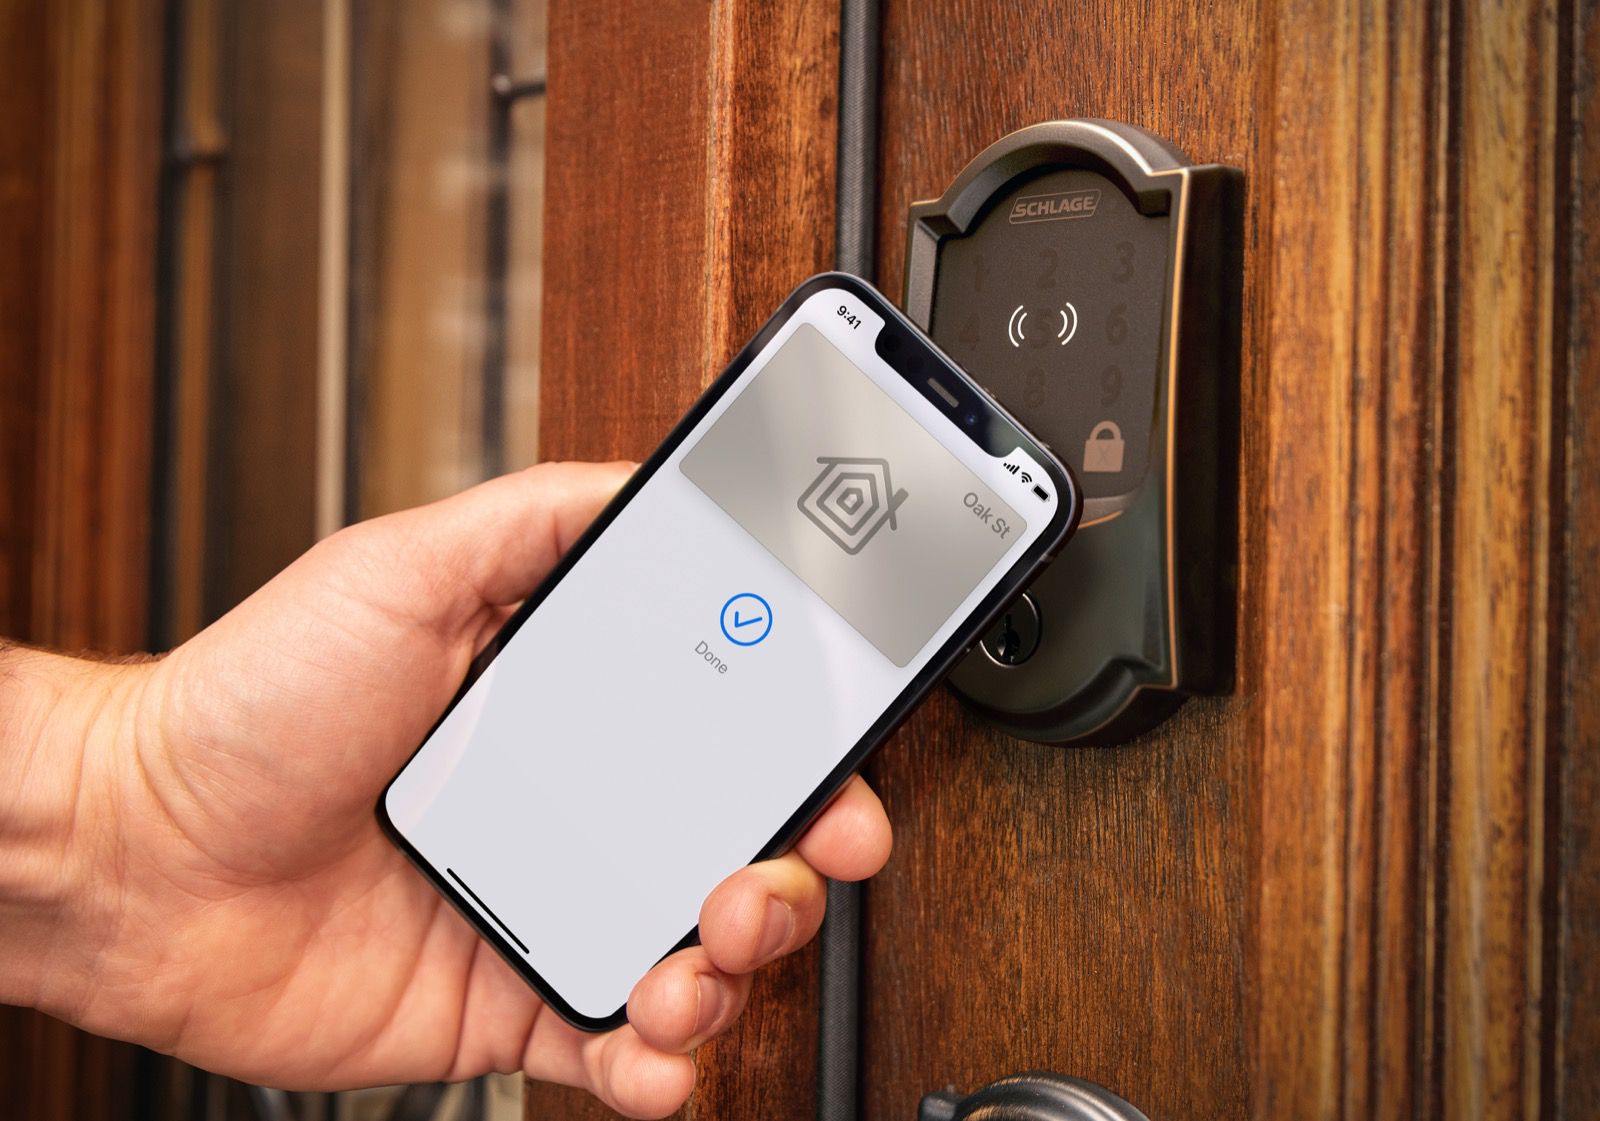 CES 2022: Schlage Introduces Encode Plus Deadbolt With Support for Apple's Home Key Feature